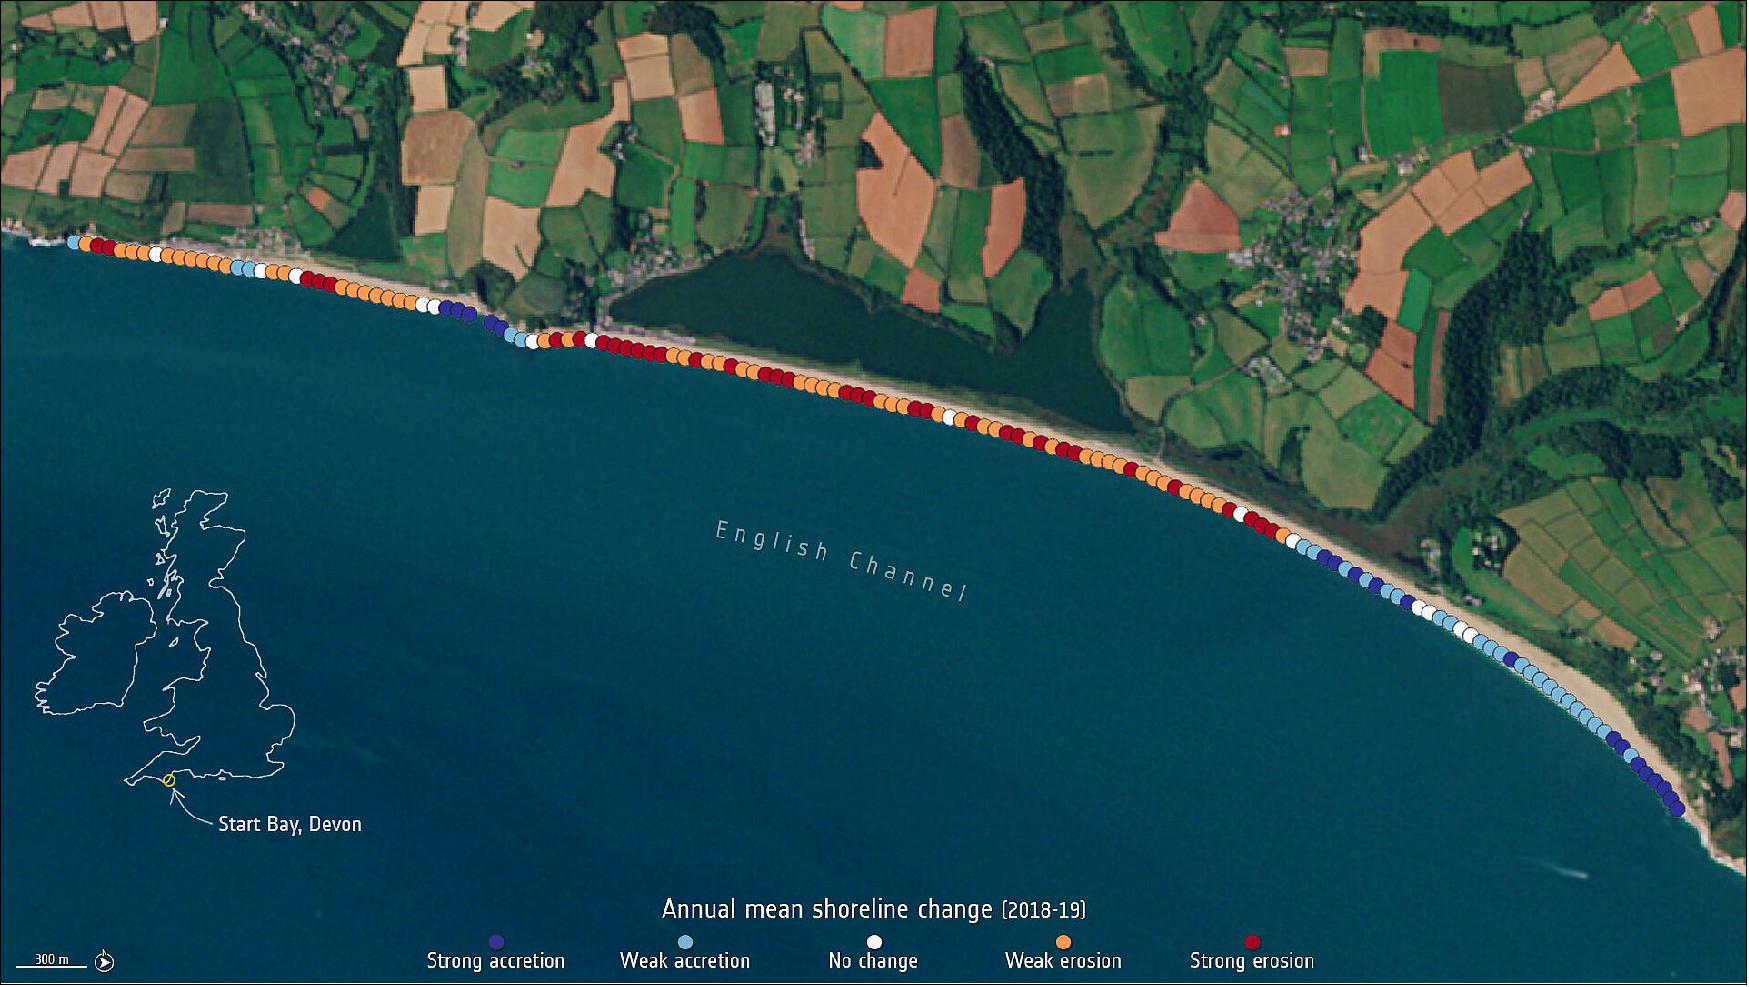 Figure 61: This image shows the annual mean shoreline change in Start Bay, Devon. Areas in red indicate strong erosion, while areas in dark blue show strong accretion (image credit: ESA, the image contains modified Copernicus sentinel data (2018-19), processed by ESA/ARGANS Ltd.)